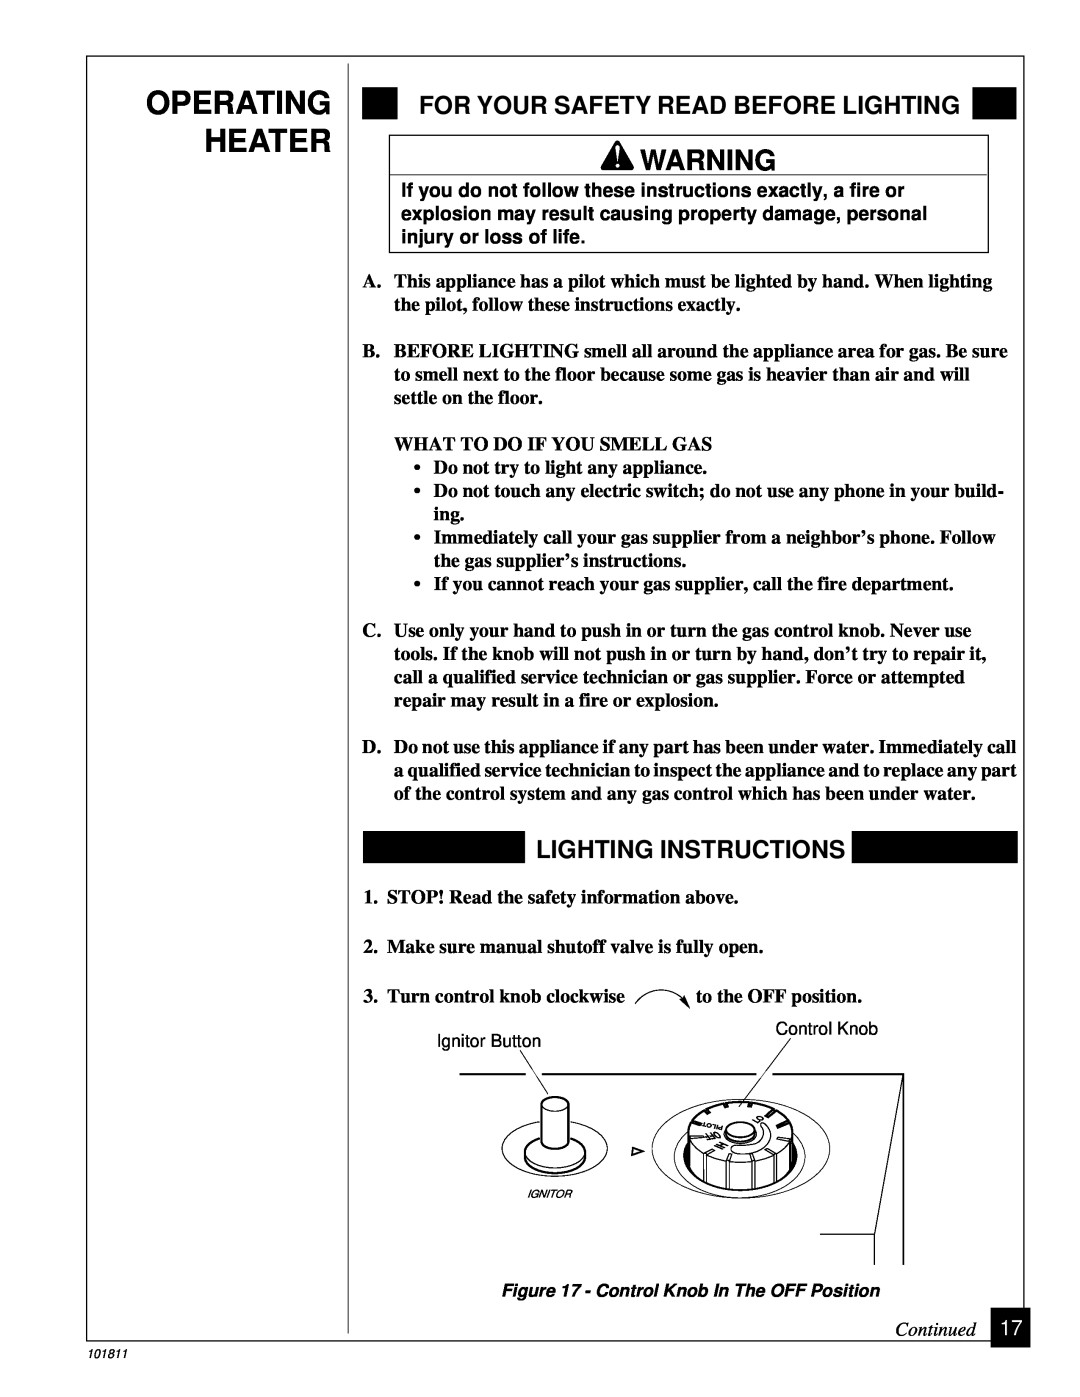 Desa 101811-01C.pdf installation manual Operating Heater, For Your Safety Read Before Lighting, Lighting Instructions 